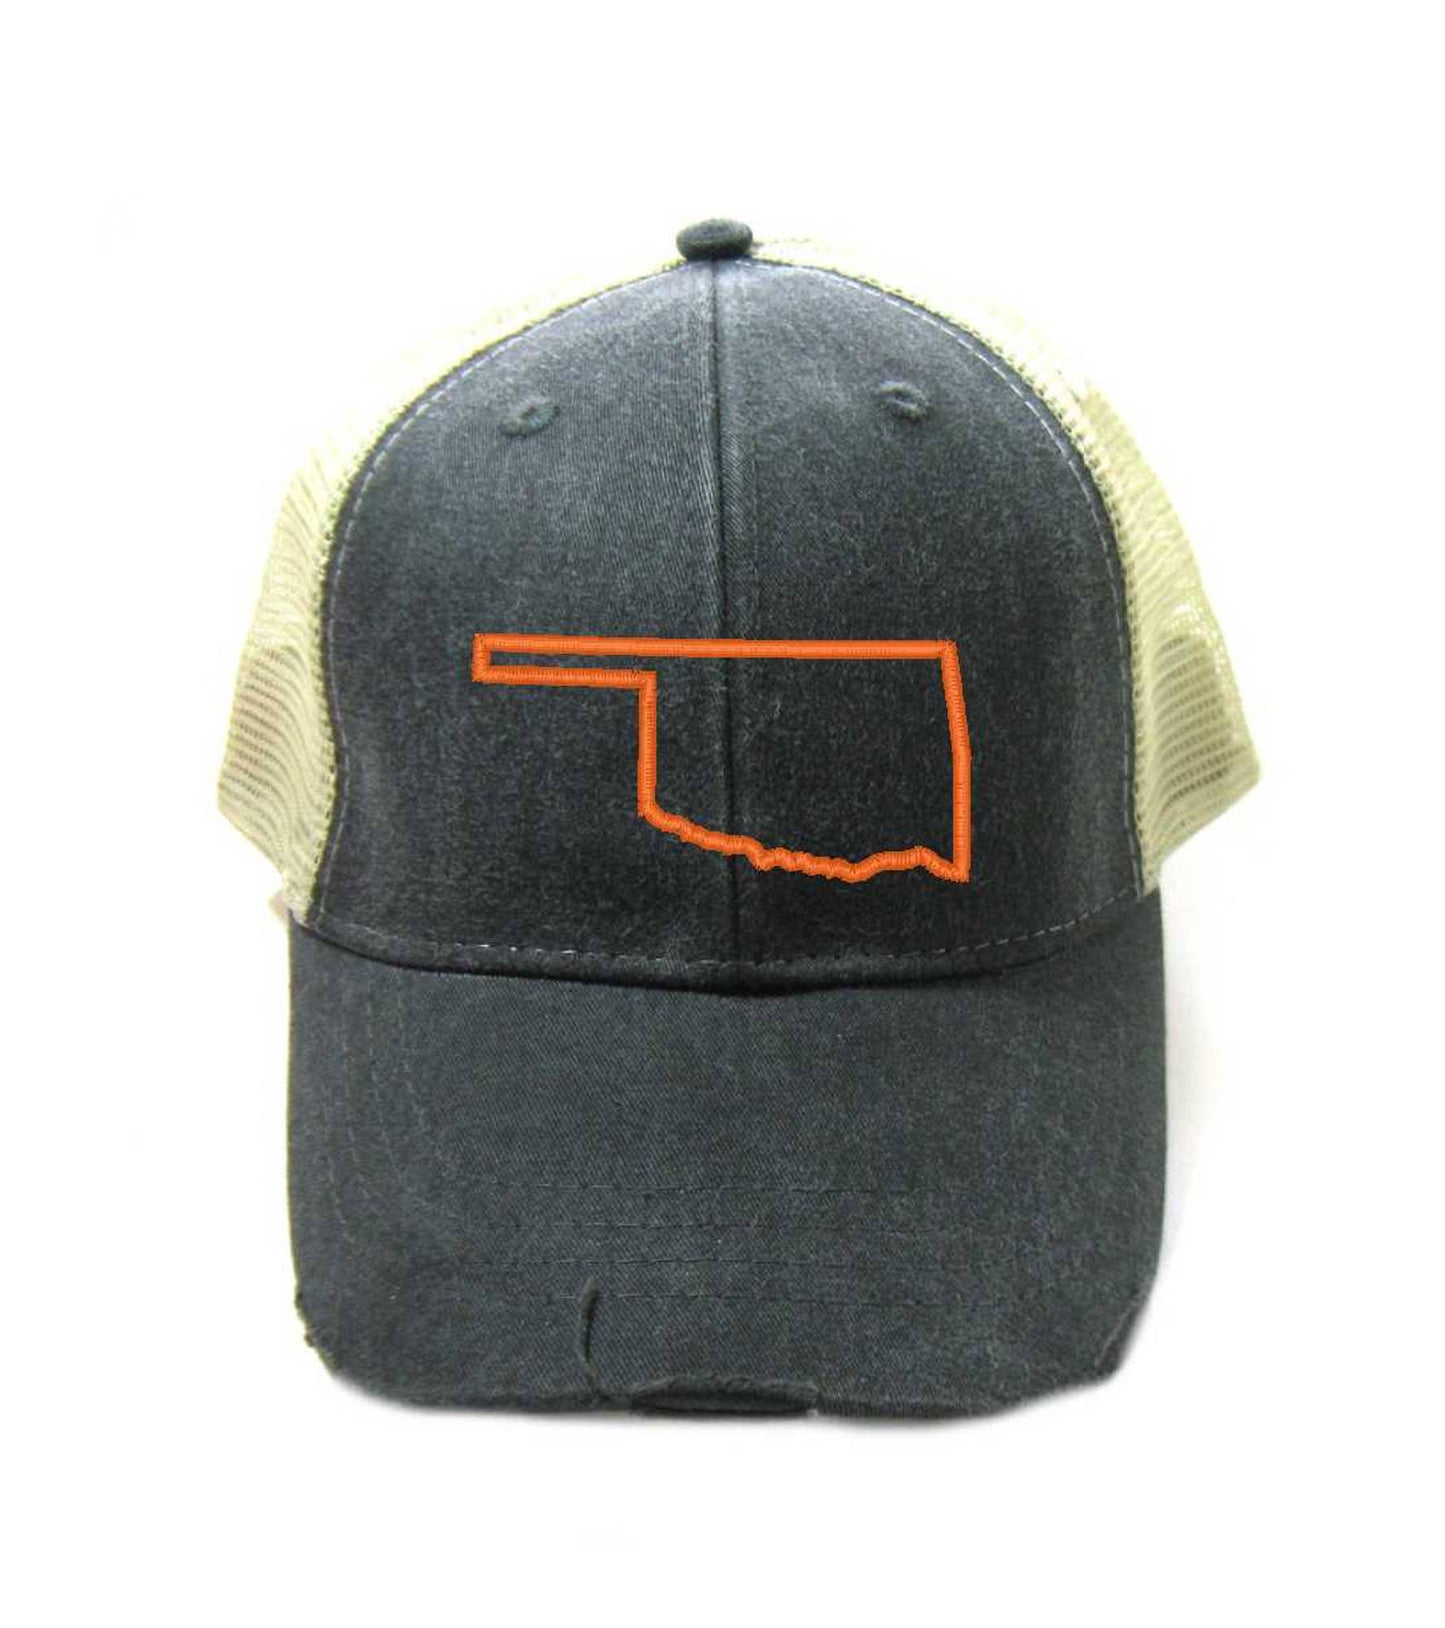 Oklahoma Hat - Distressed Snapback Trucker Hat - Oklahoma State Outline - Many Colors Available